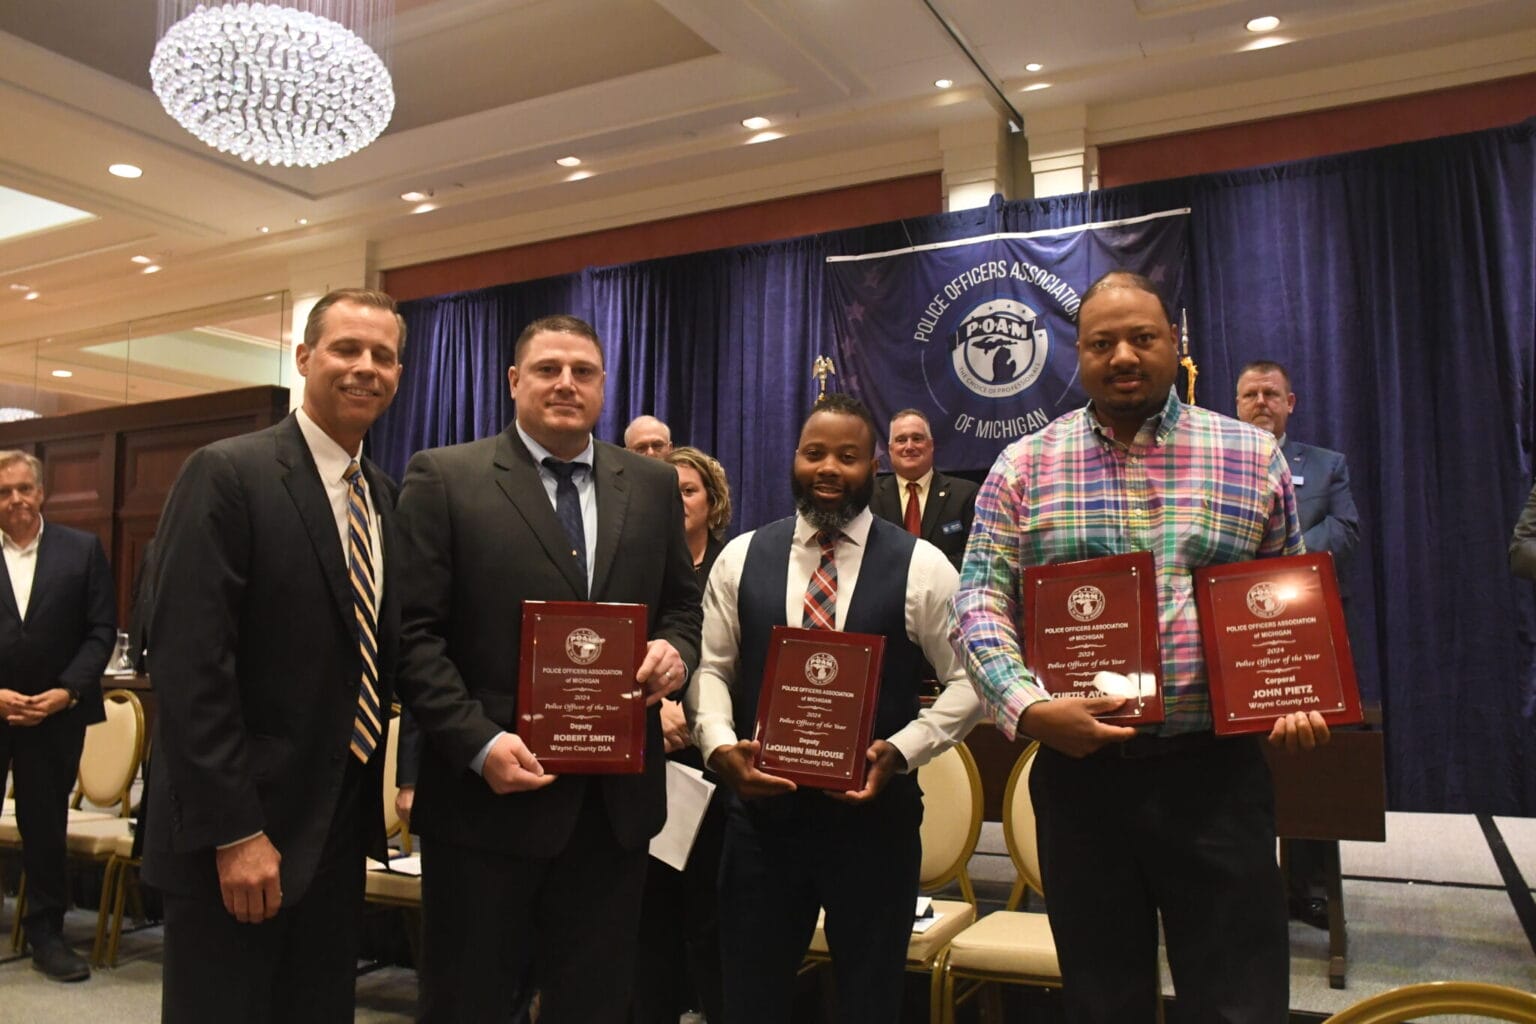 Judge George Mertz presented Wayne County Deputy Sheriff Association's Deputies Curtis Aycox, Robert Smith, & LaQuawn Milhouse and Corporal John Pietz with the 2024 Police Officers of the Year Awards.